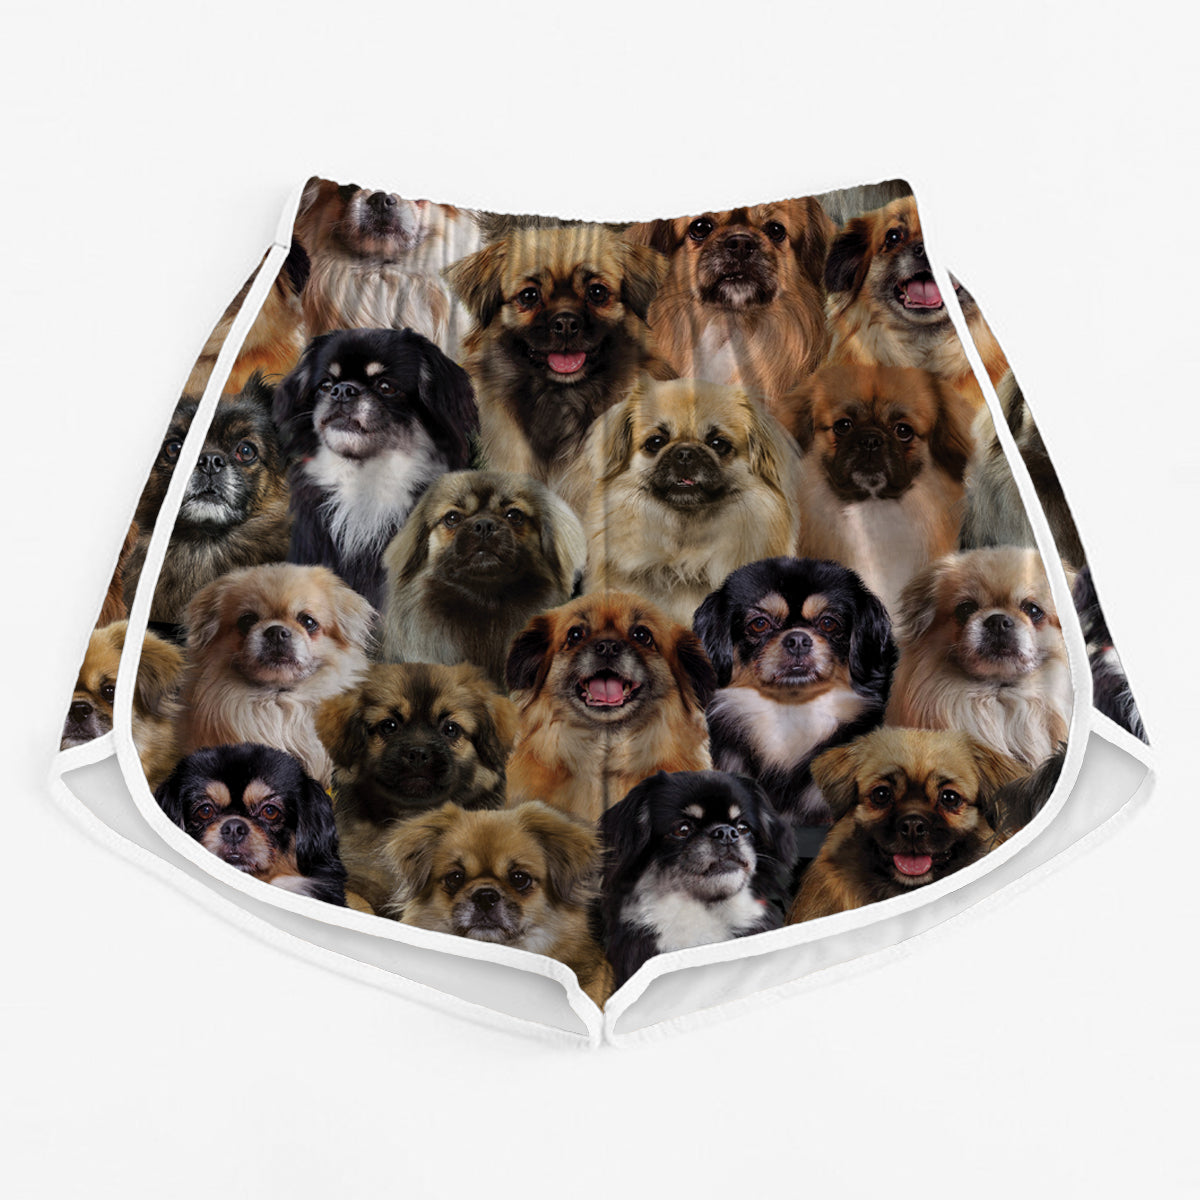 You Will Have A Bunch Of Tibetan Spaniels - Women's Running Shorts V1